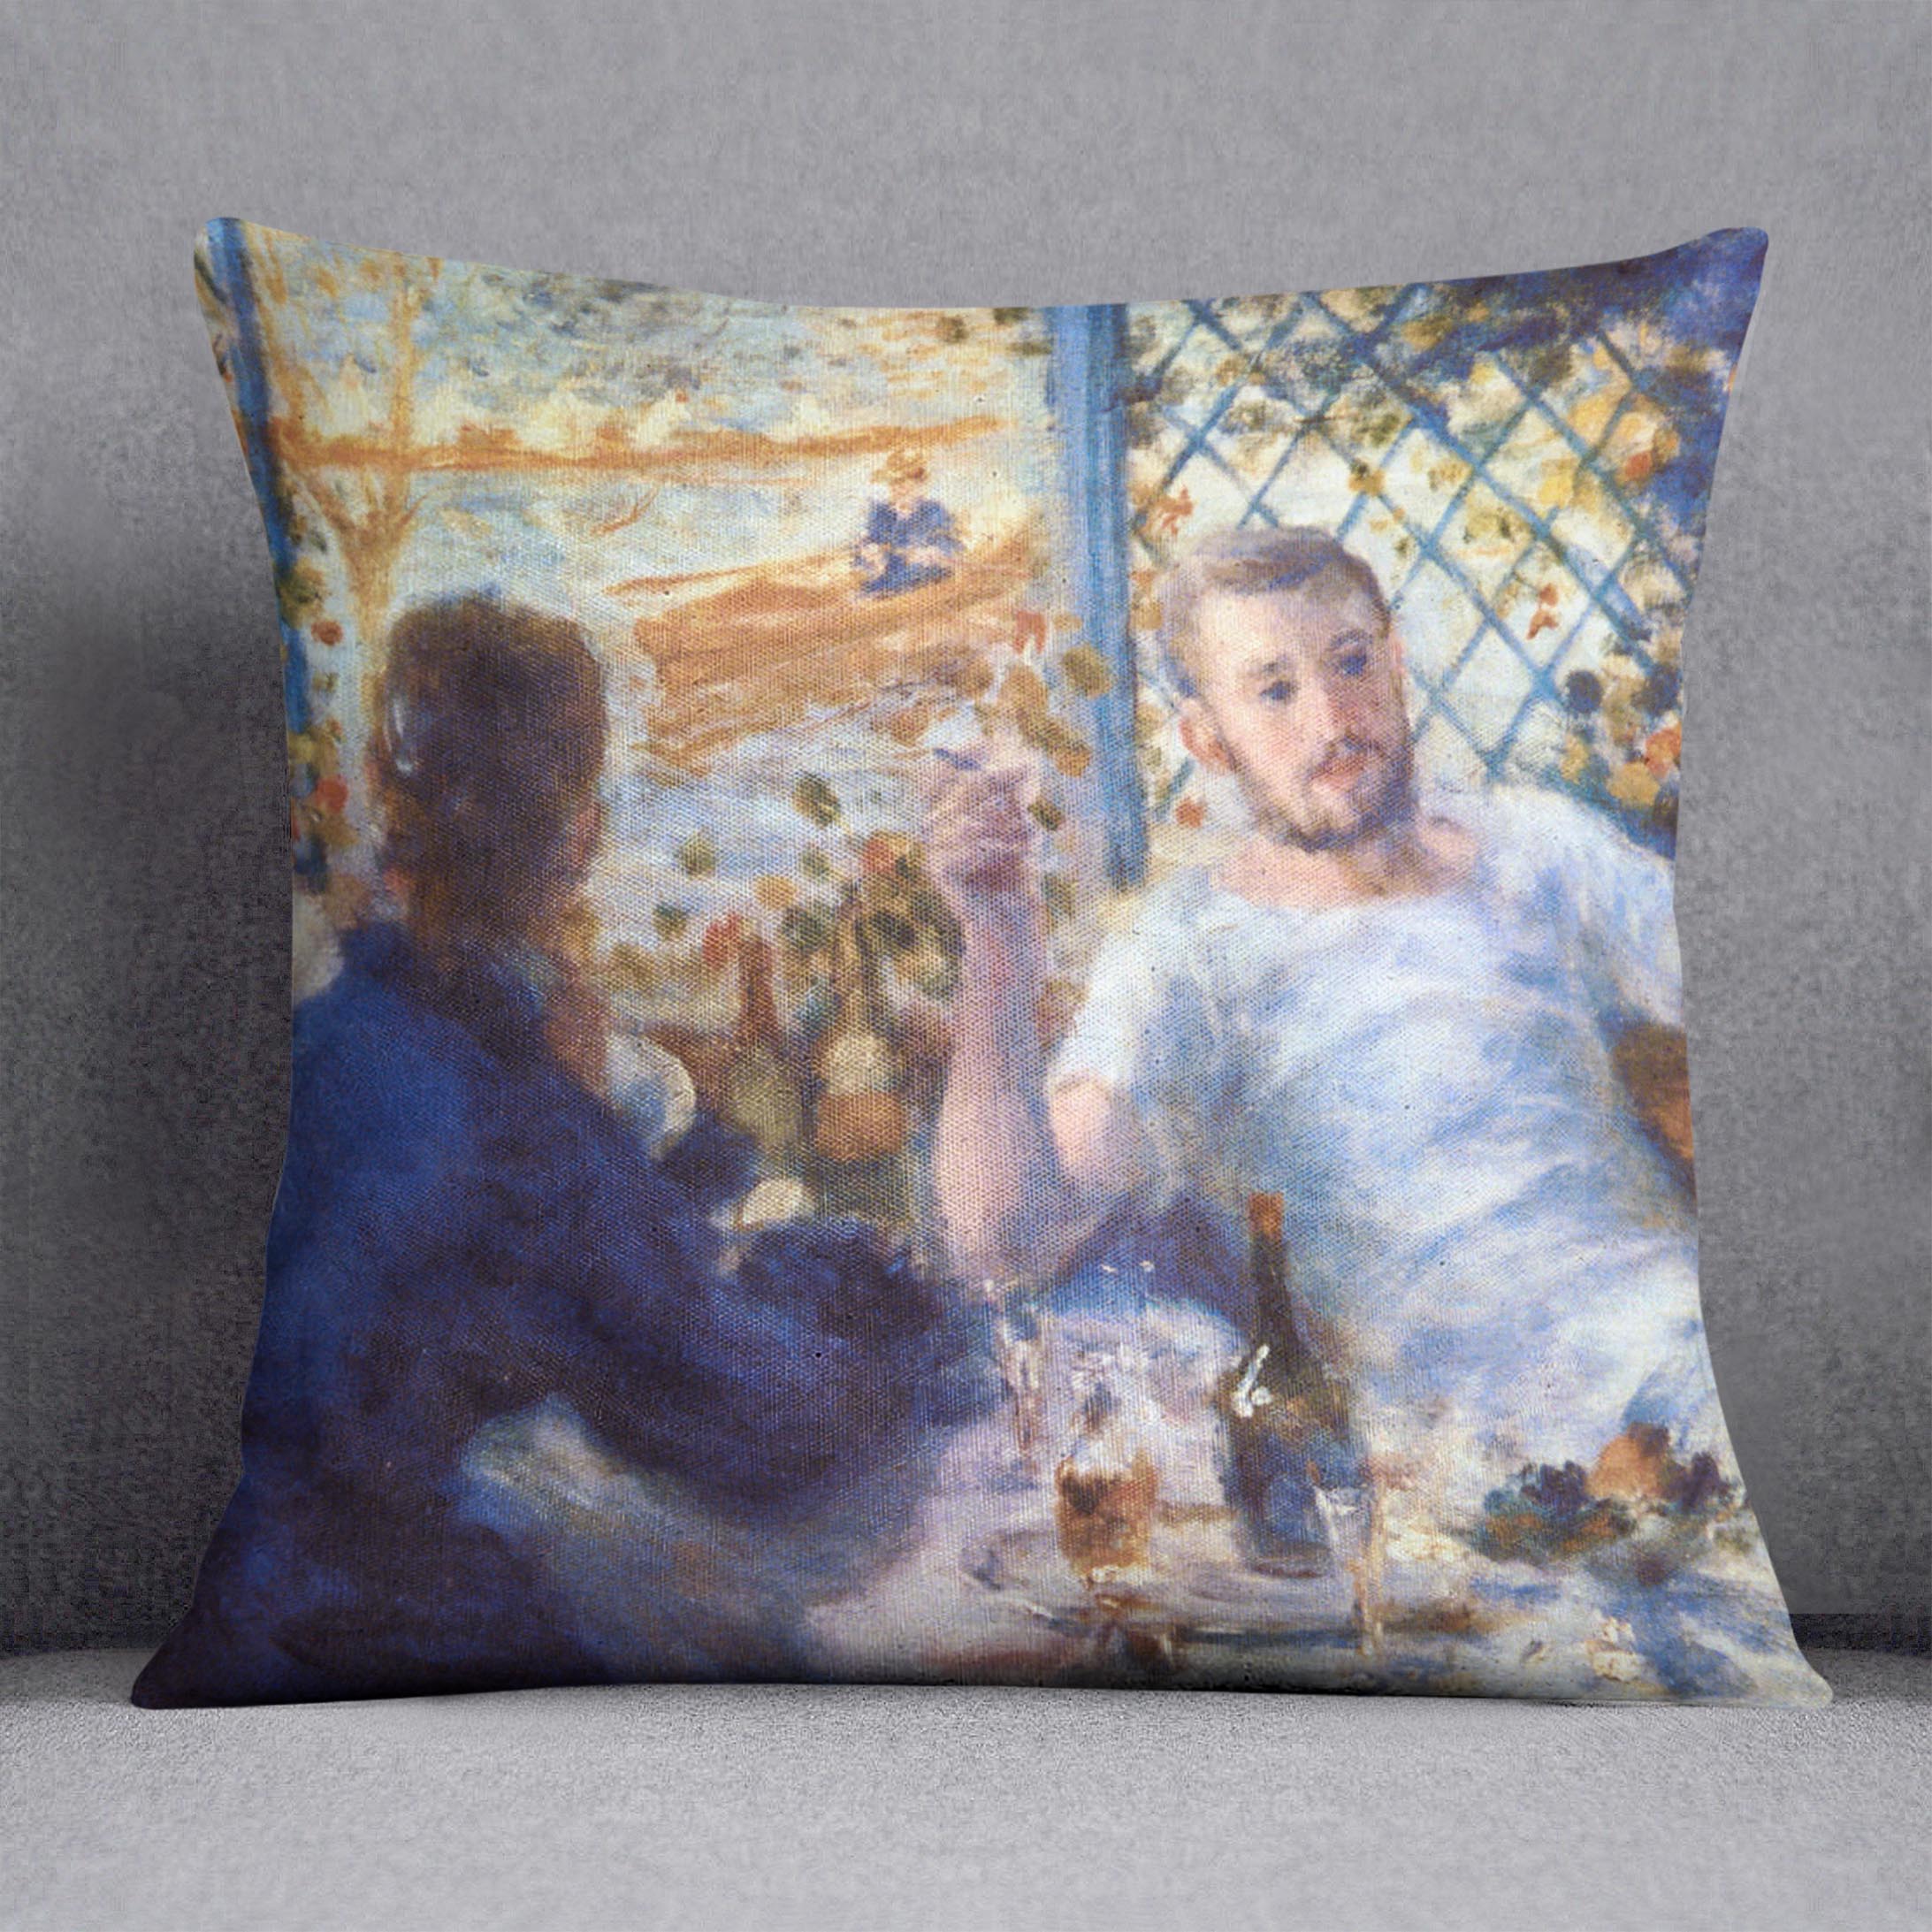 The Rowers Lunch by Renoir Cushion